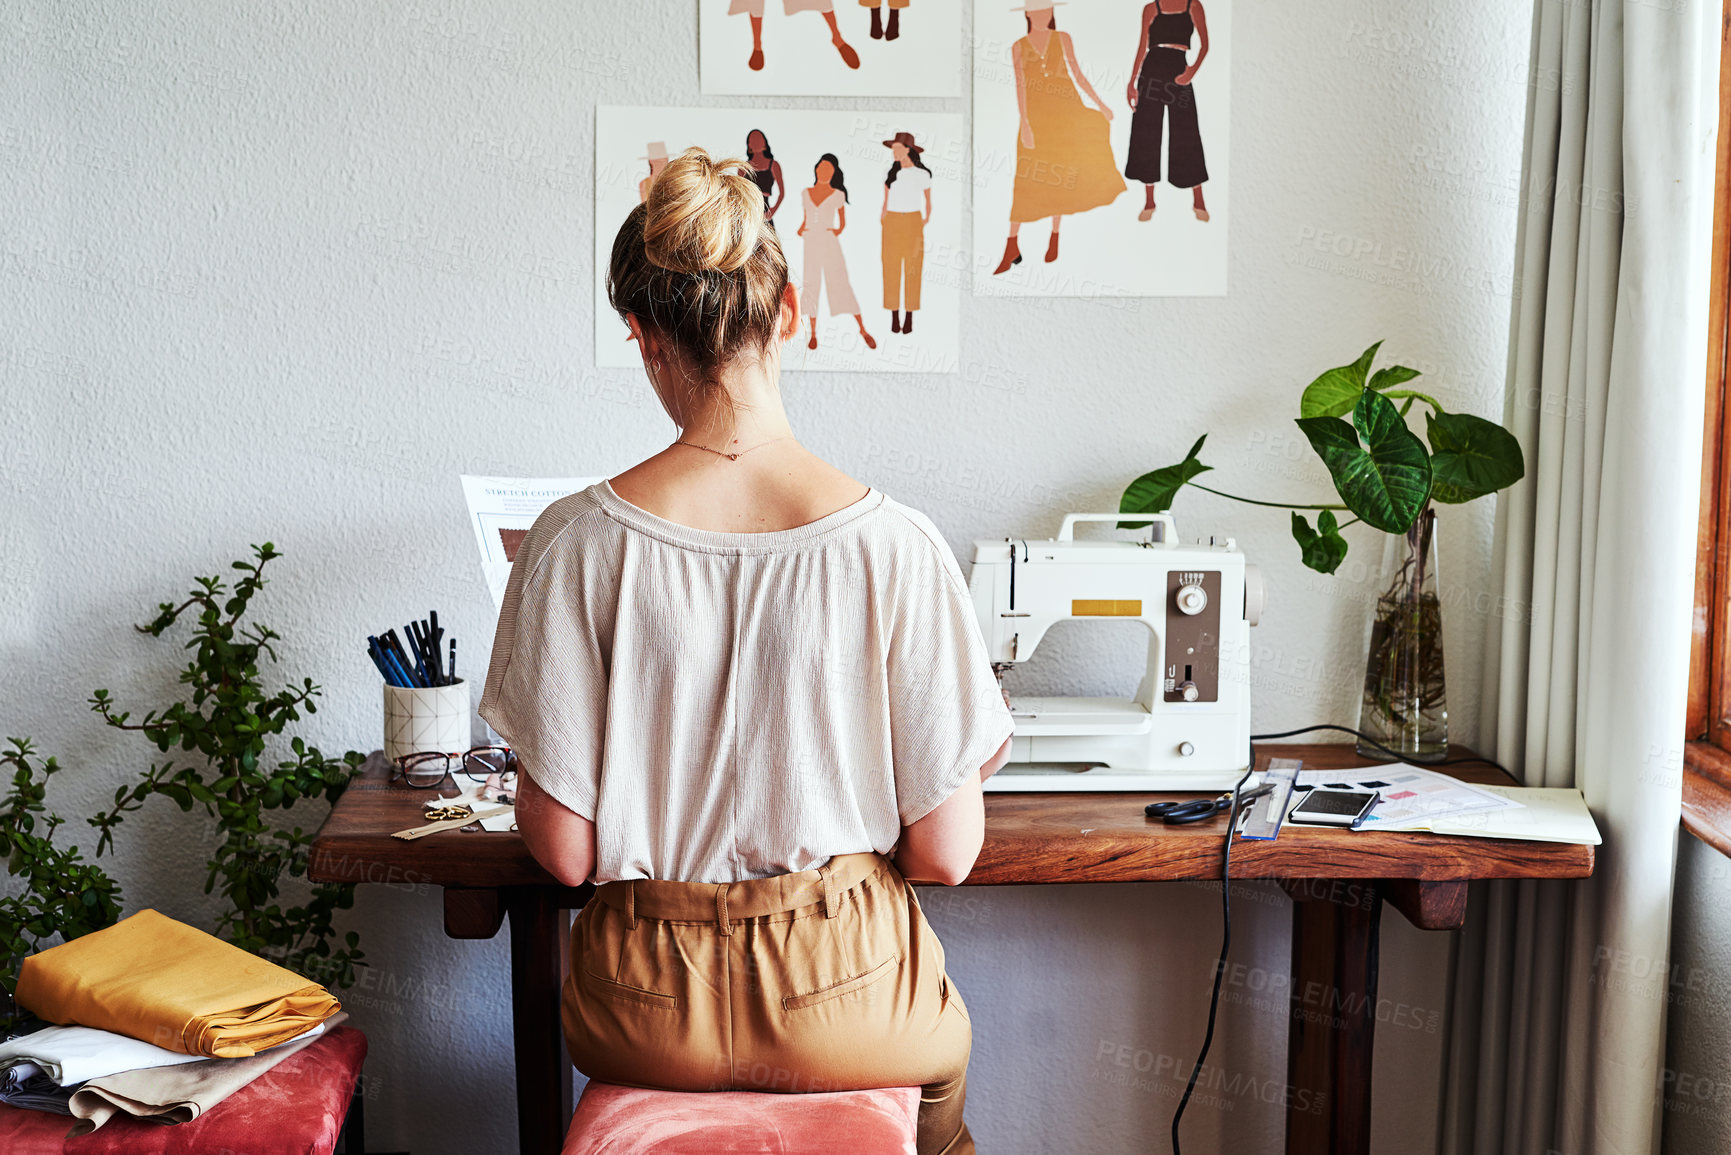 Buy stock photo Fashion, design and back of woman at sewing machine in small business, creative ideas and focus in studio. Creativity, sustainable startup and designer, tailor or young entrepreneur working at table.